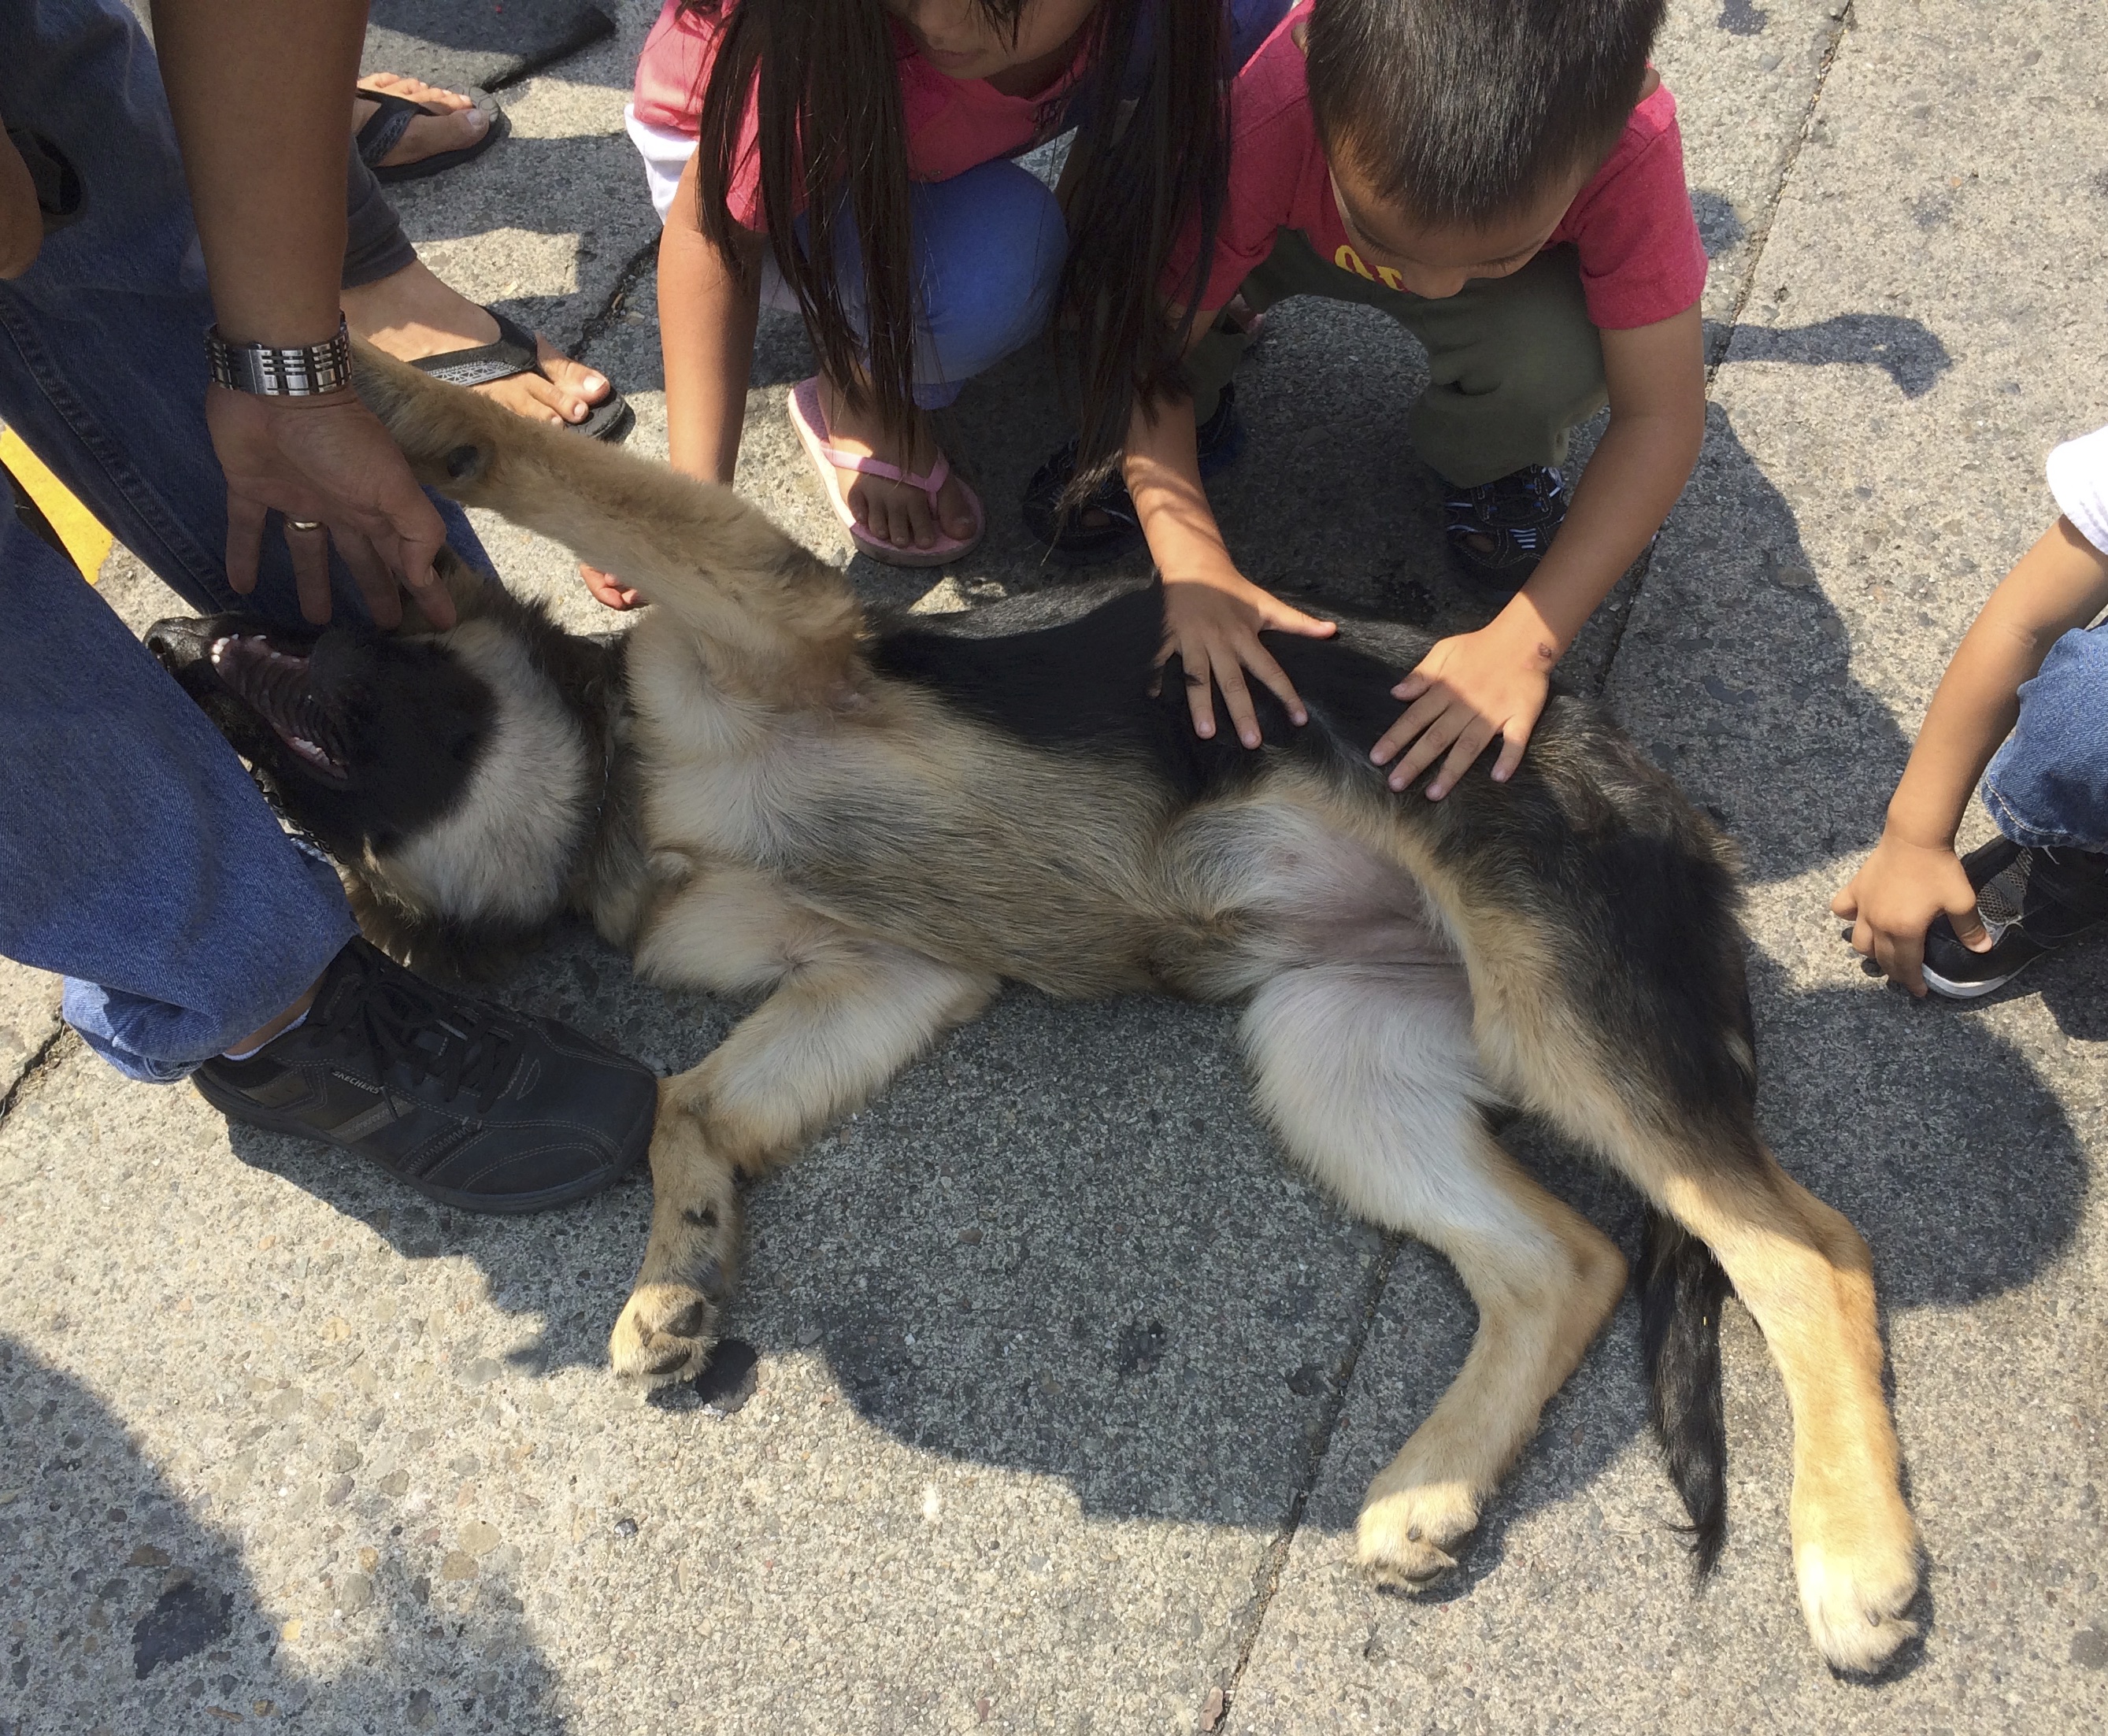 Kids Petting An Adorable German Shepherd Puppy Who Is Lying On The Ground